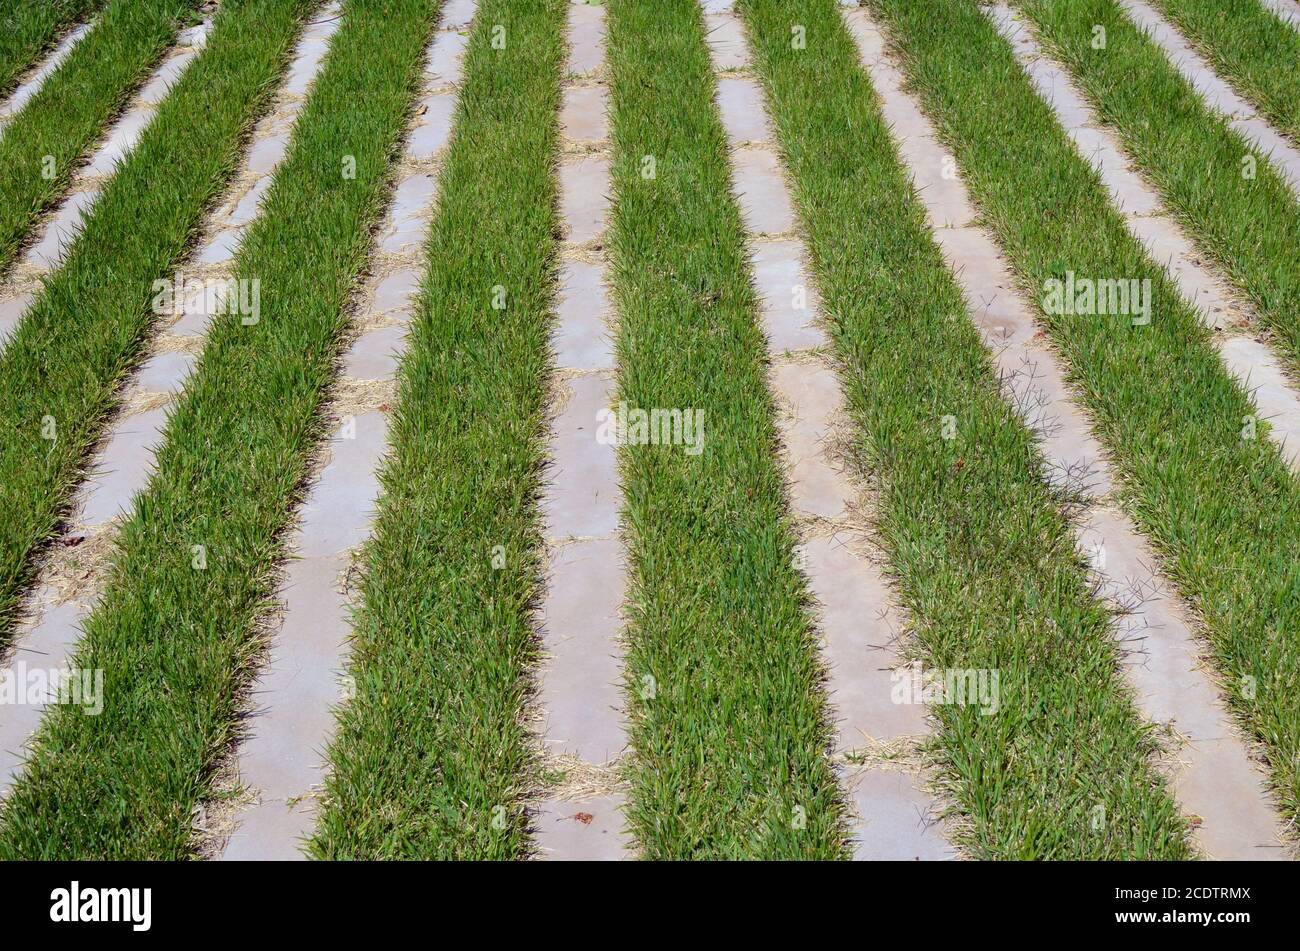 Between the stone slabs grow even long rows of green grass Stock Photo